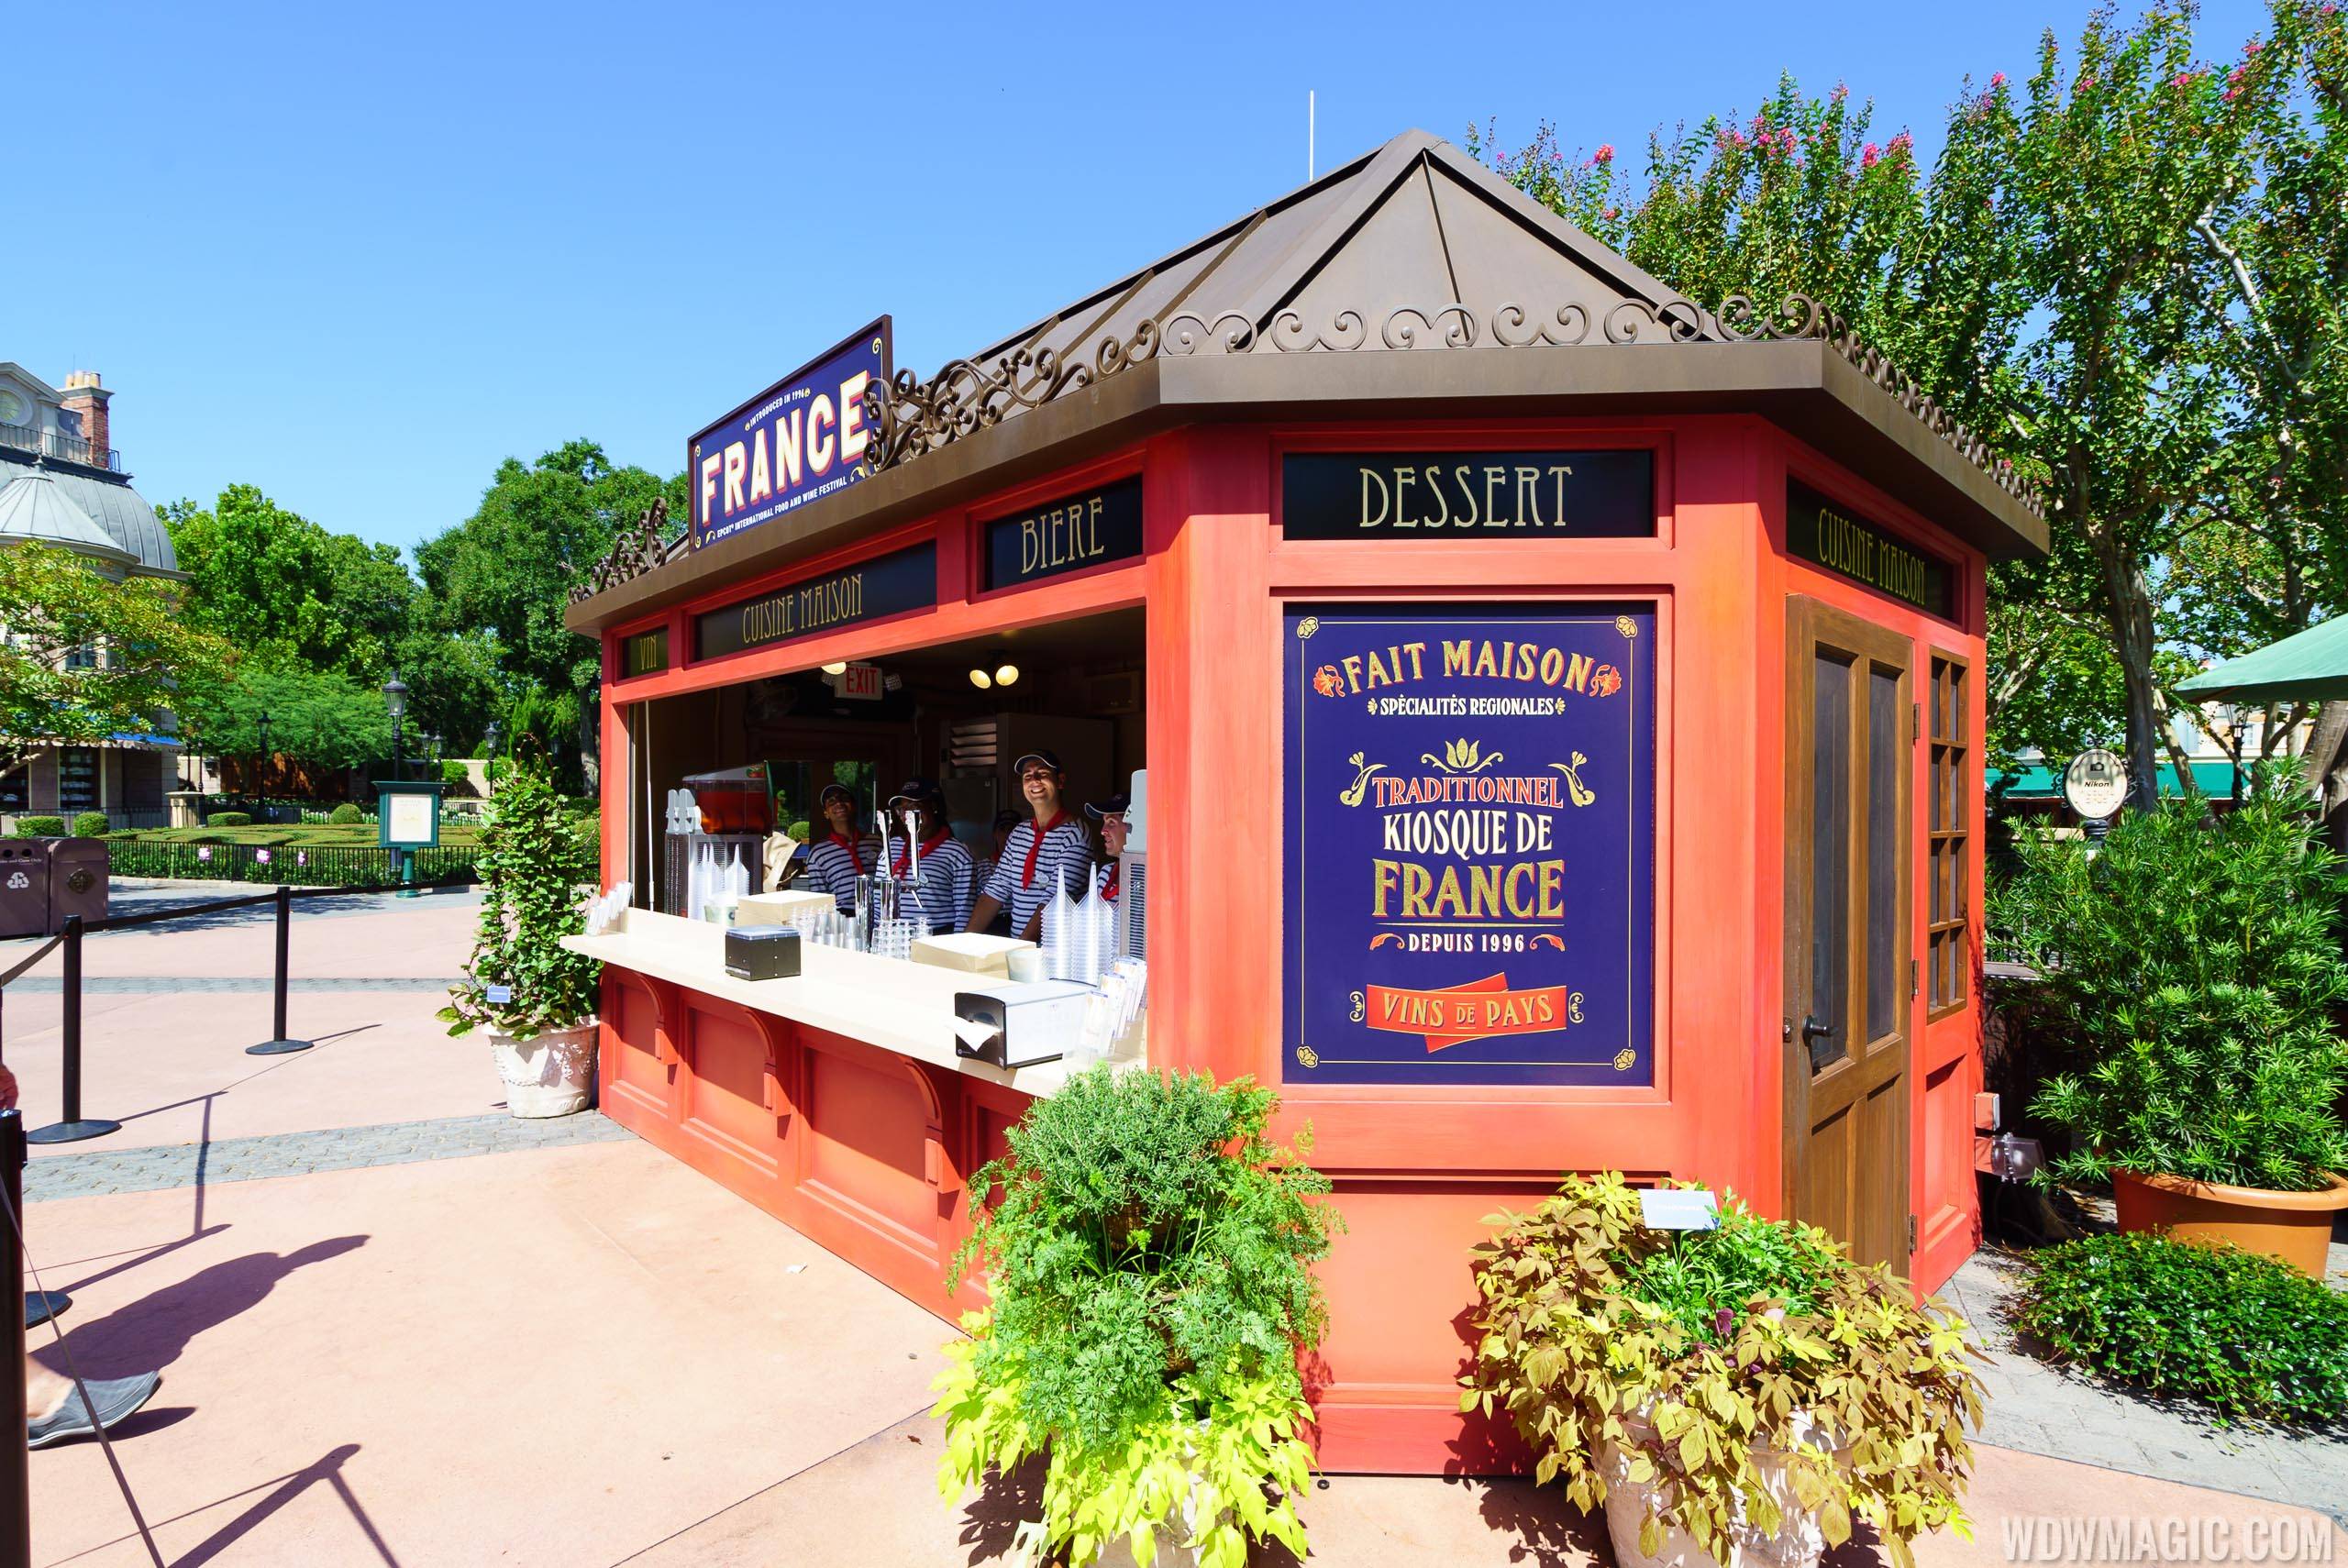 2017 Epcot Food and Wine Festival - France marketplace kiosk